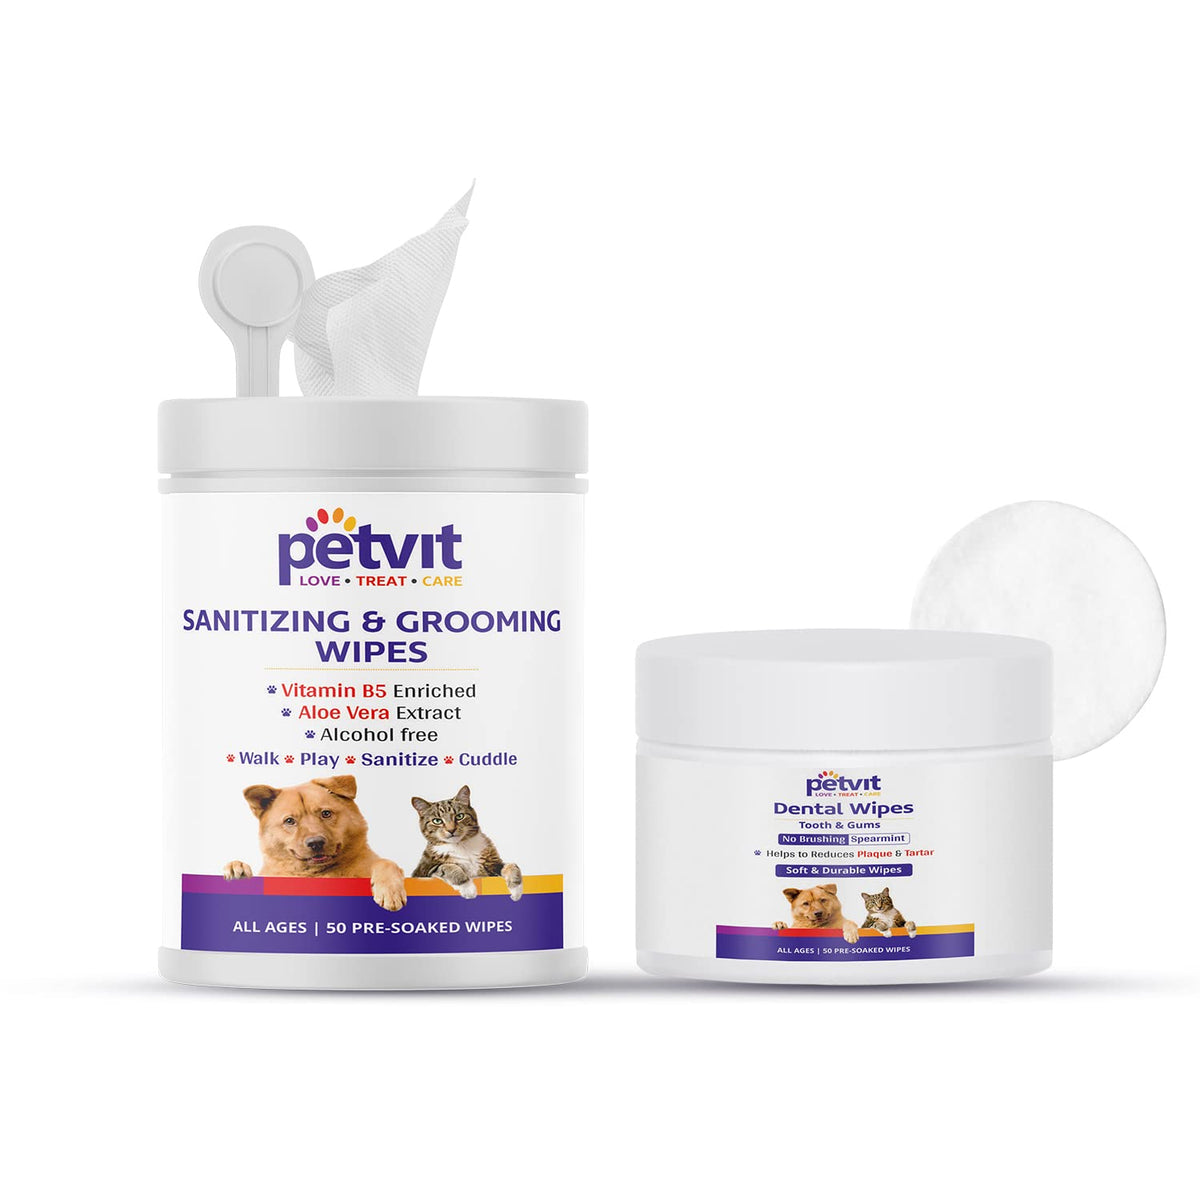 Petvit Cleansing & Grooming Wipes for Dog and Cat Enriched with Vitamin B5 and Aloe Vera - 50 Wipes & Dental Wipes for Teeth Cleaning for All Breed Dog & Cat - 50 Wipes for All Age Group (Combo)